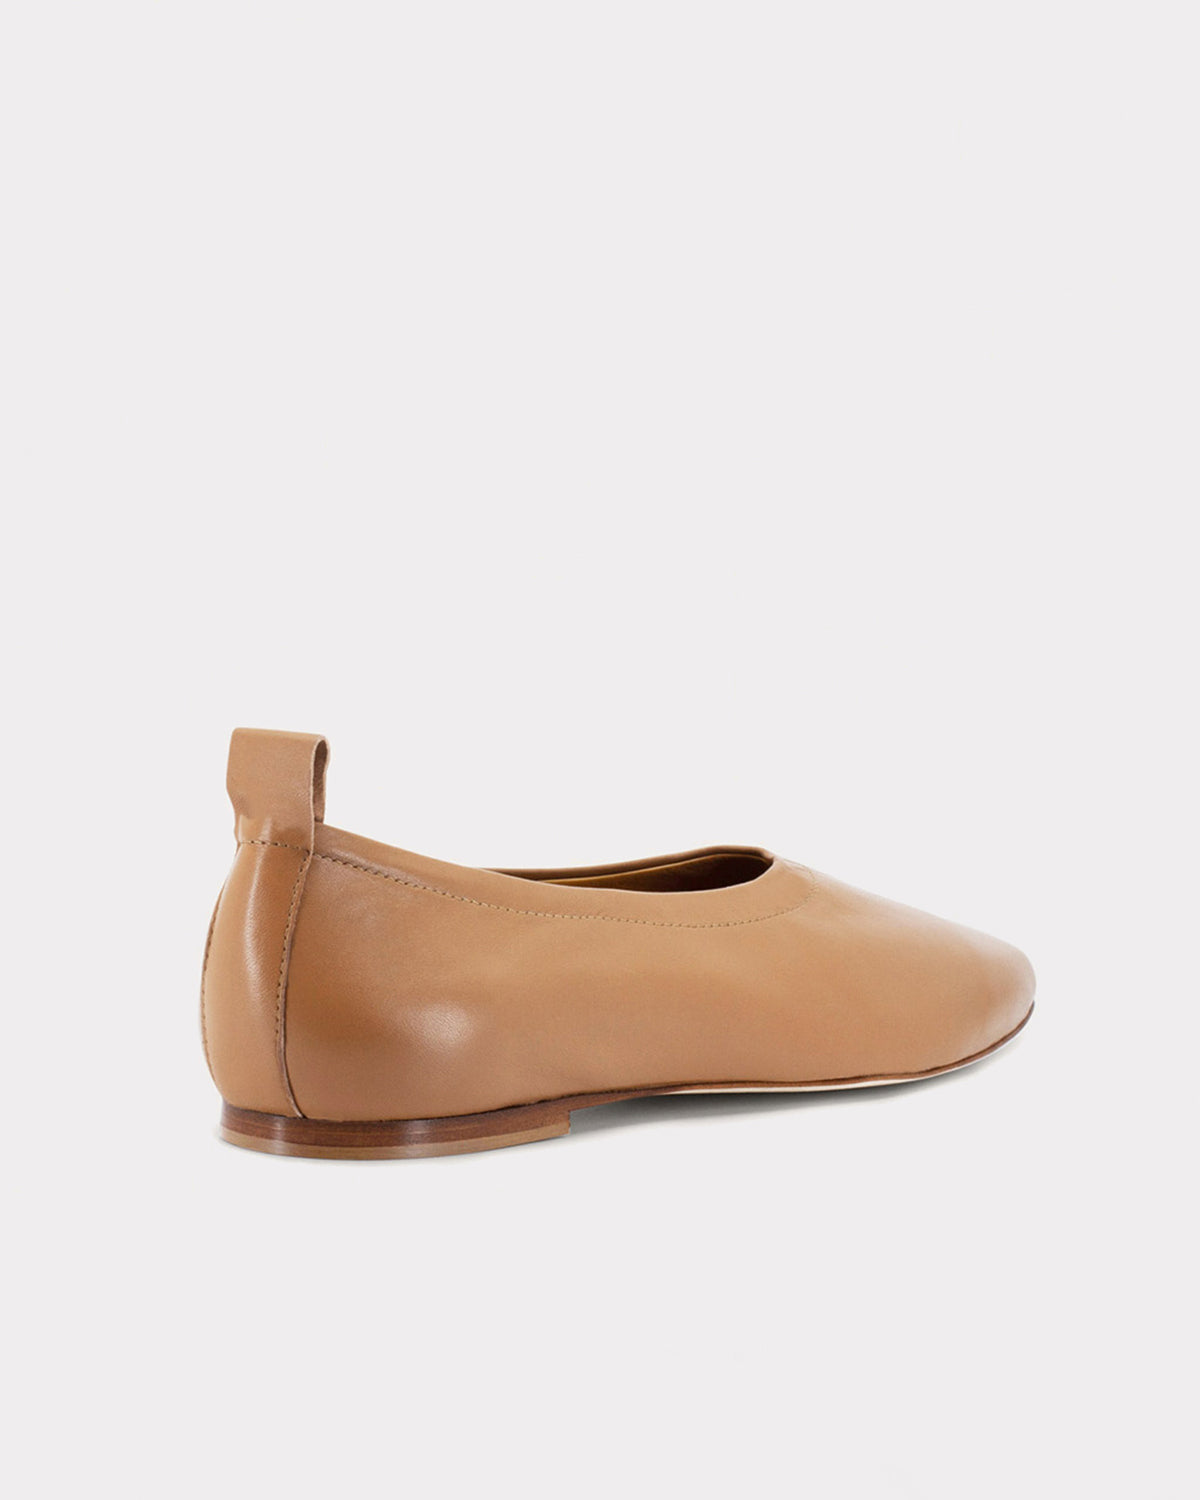 slow fashion leather flats in tan